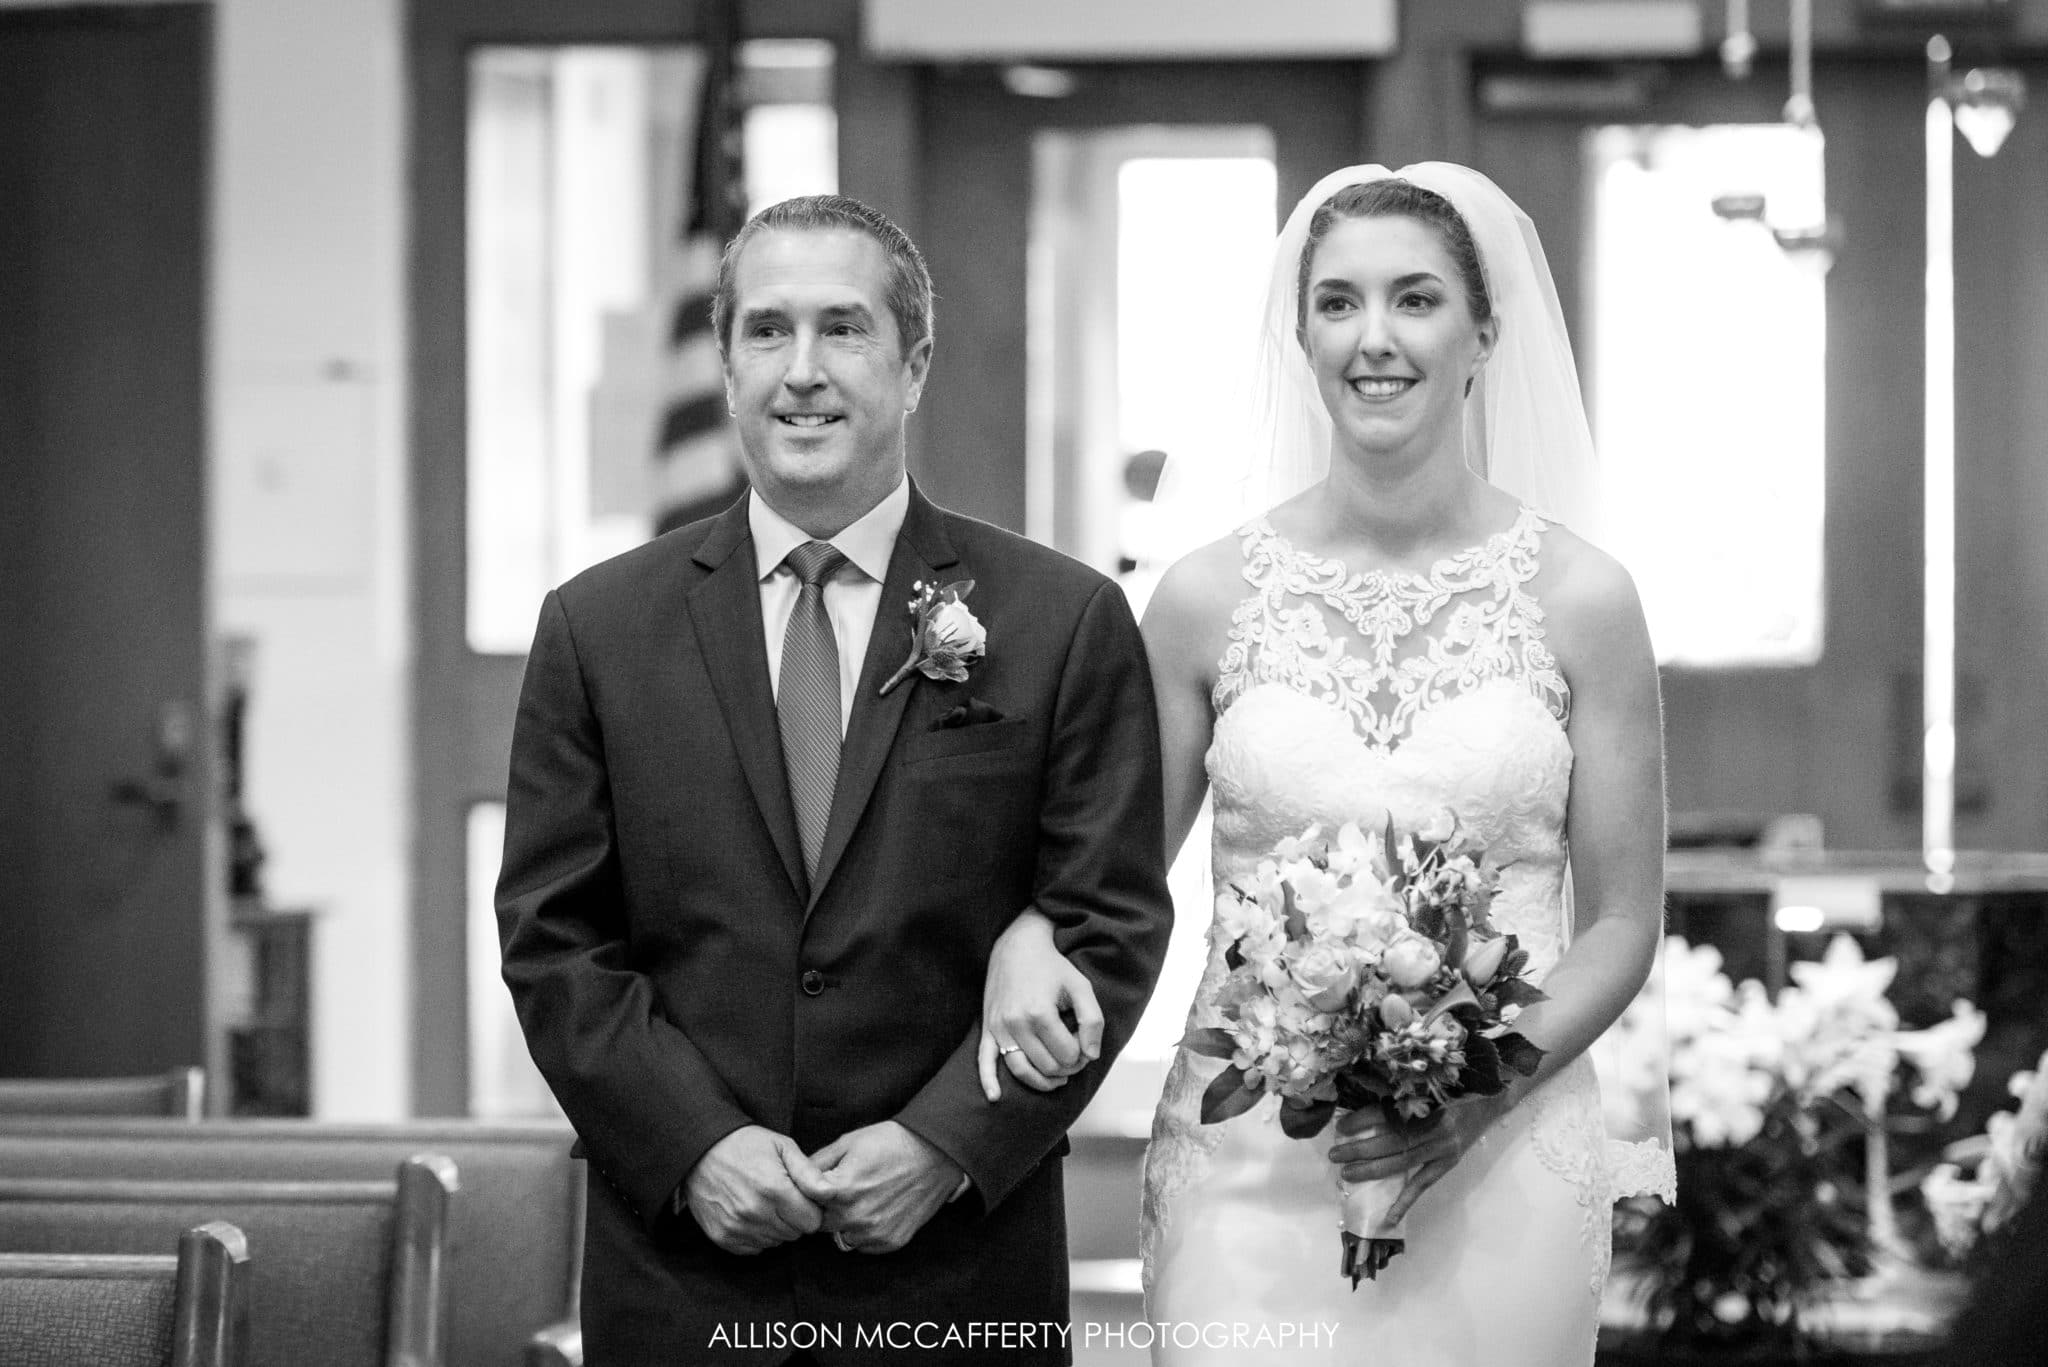 Father and daughter walking down the aisle on her wedding day.